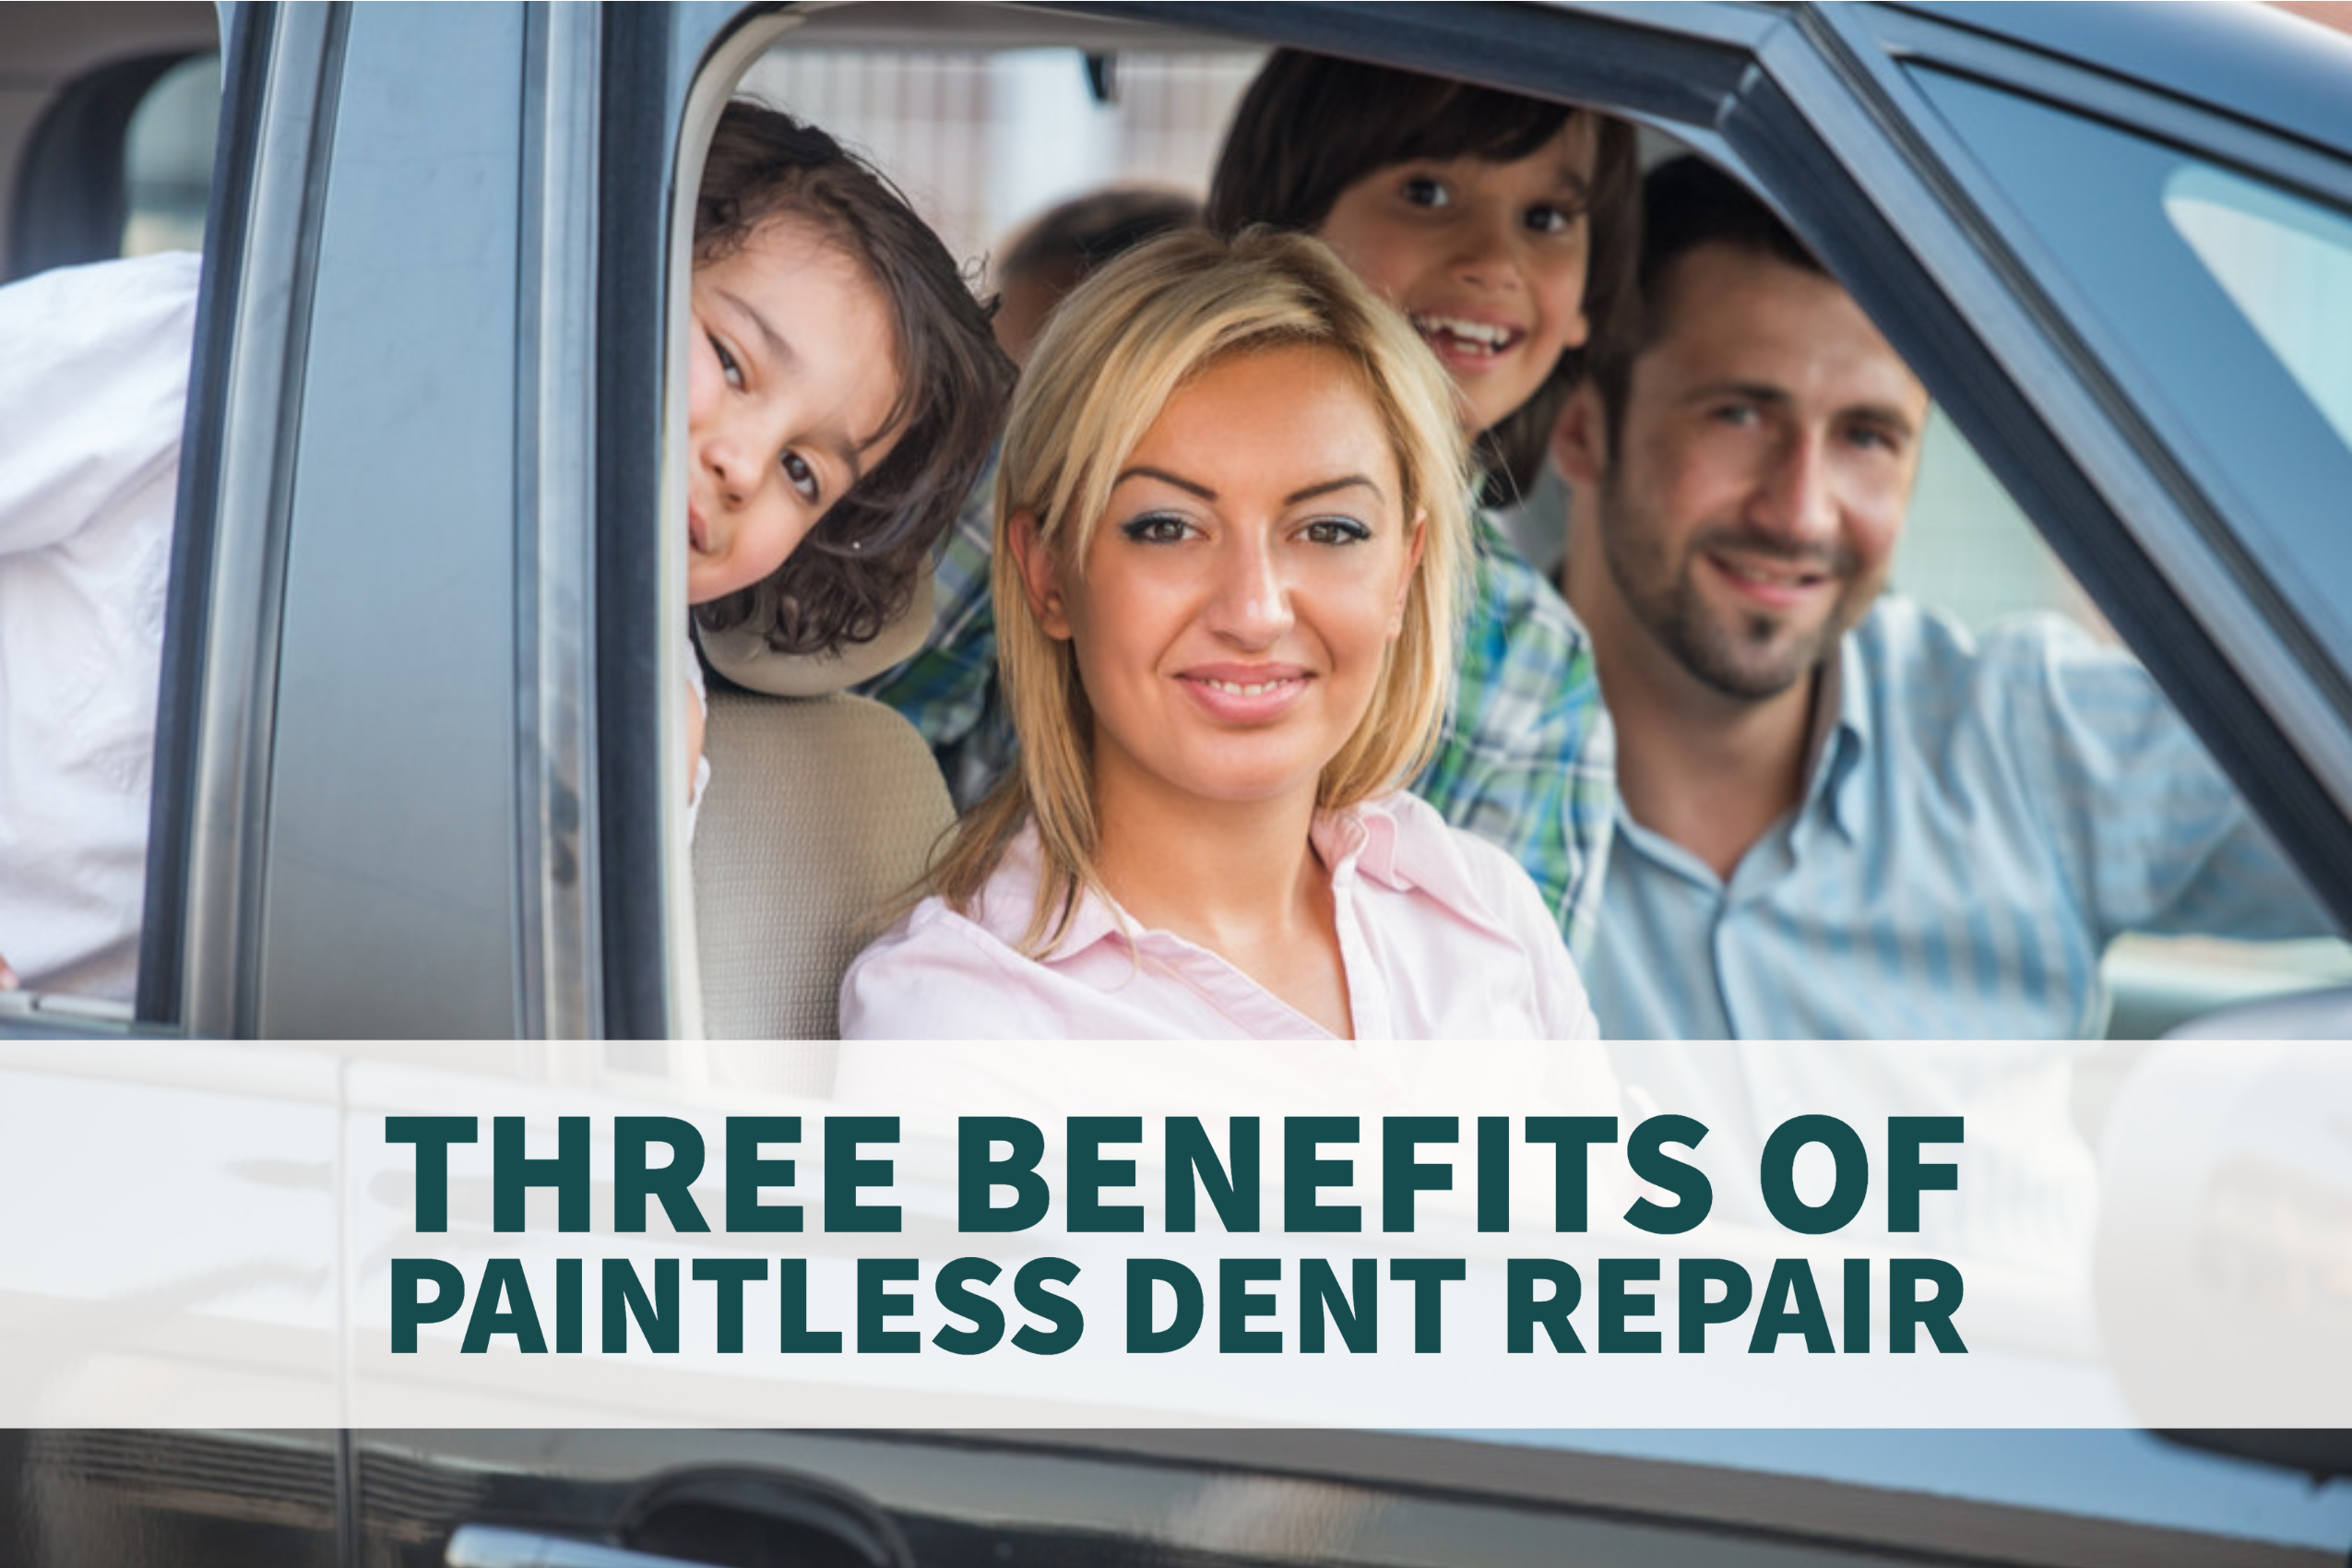 Innovations In Paintless Dent Repair: What's New? (Alamo) thumbnail